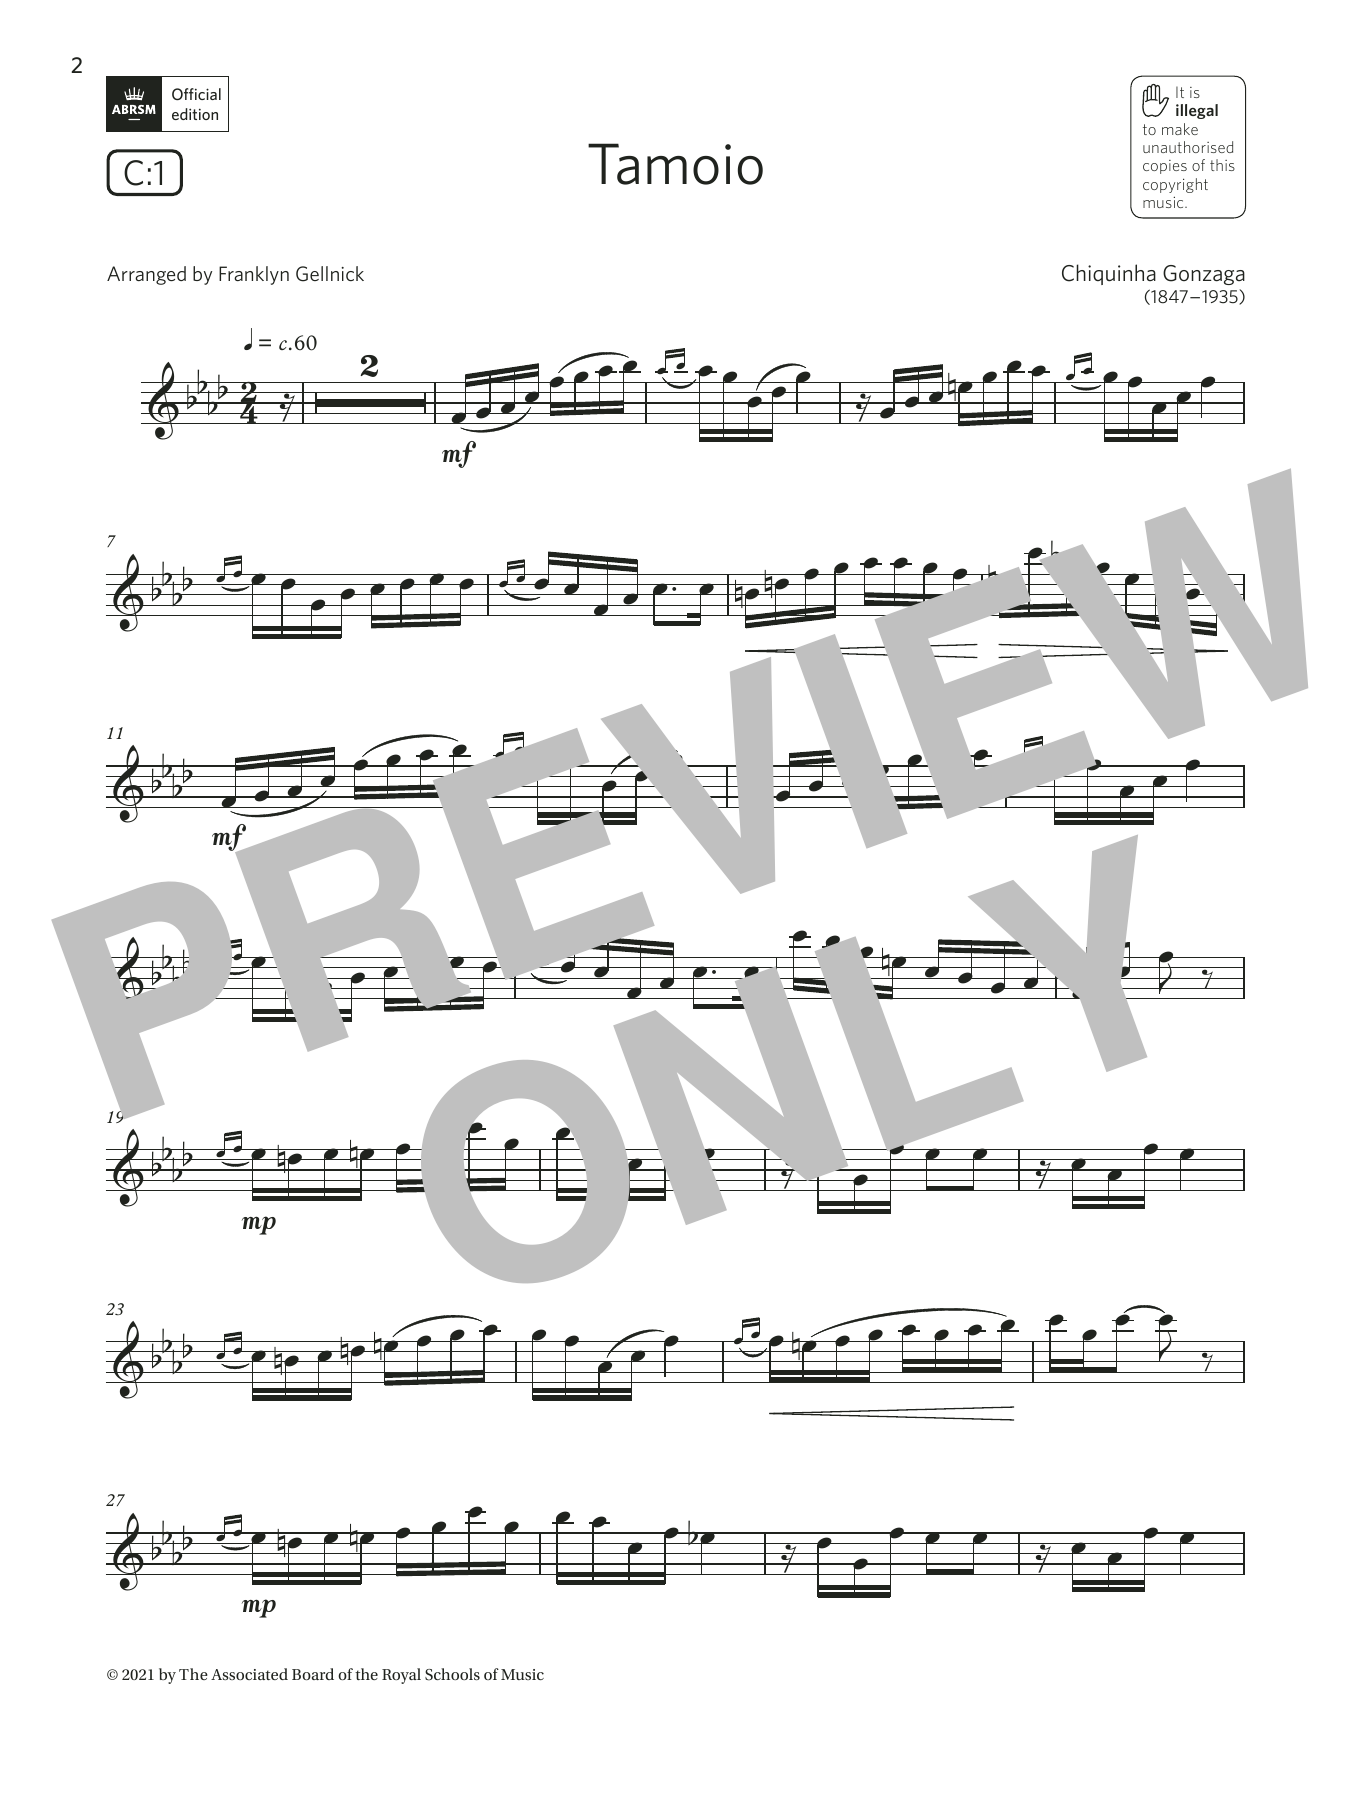 Download Chiquinha Gonzaga Tamoio (Grade 6 List C1 from the ABRSM Sheet Music